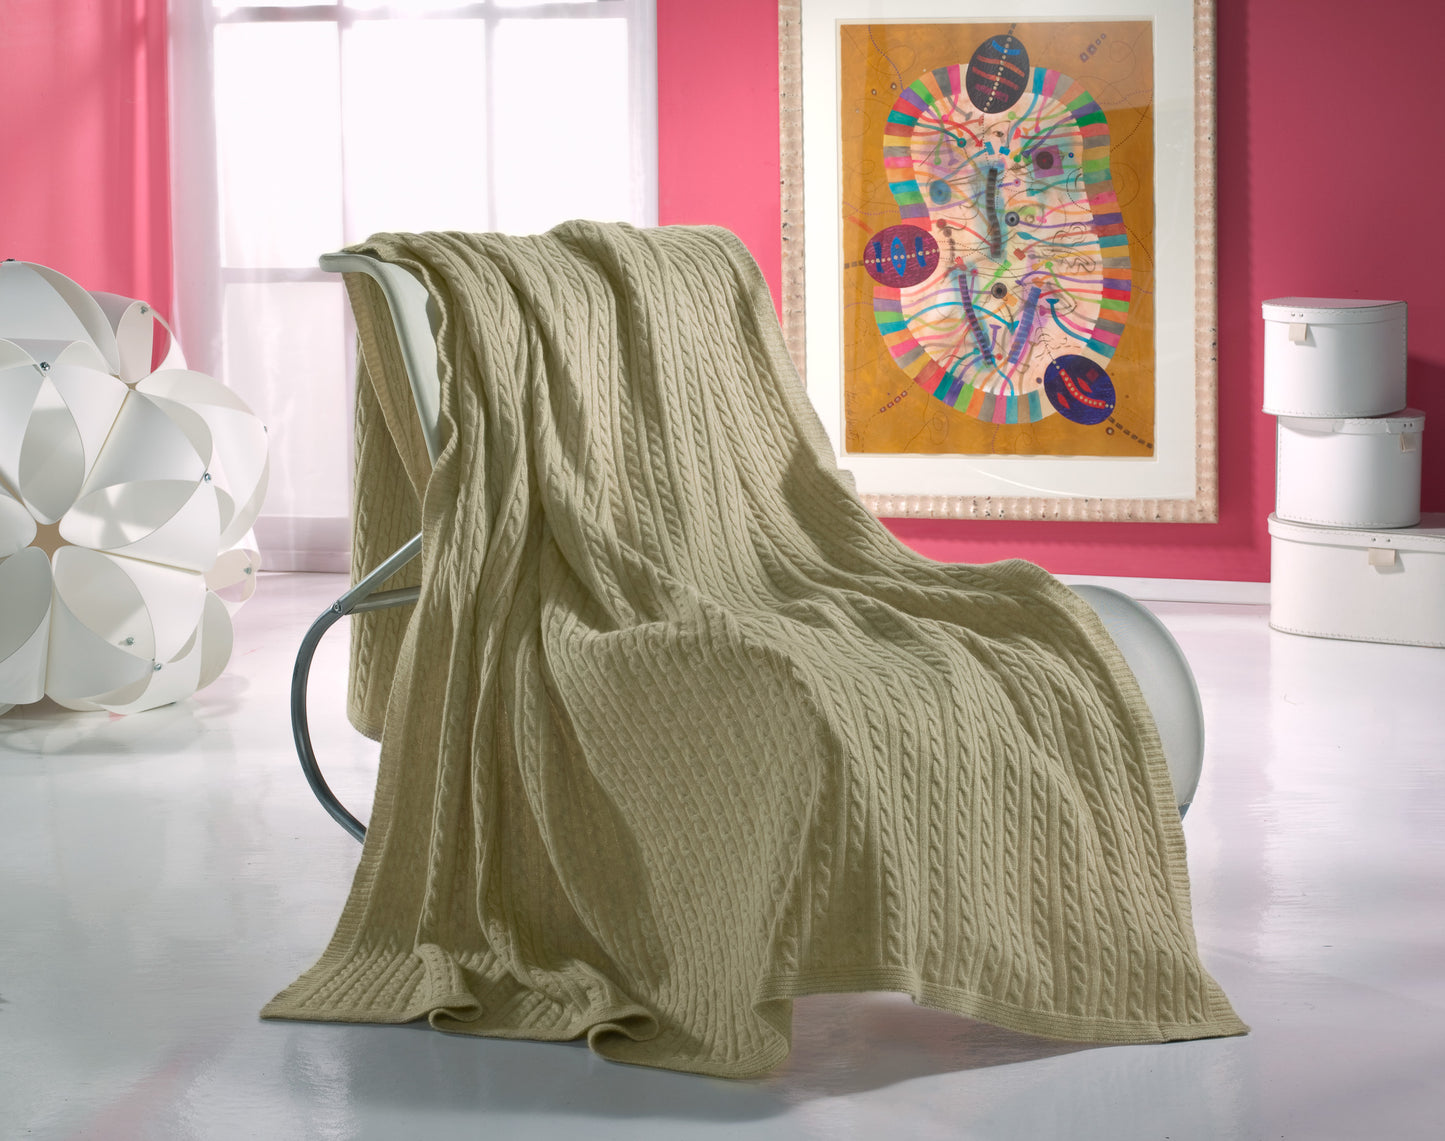 KNITTED WITH PLAIT CRADLE BLANKET | Pure Cashmere